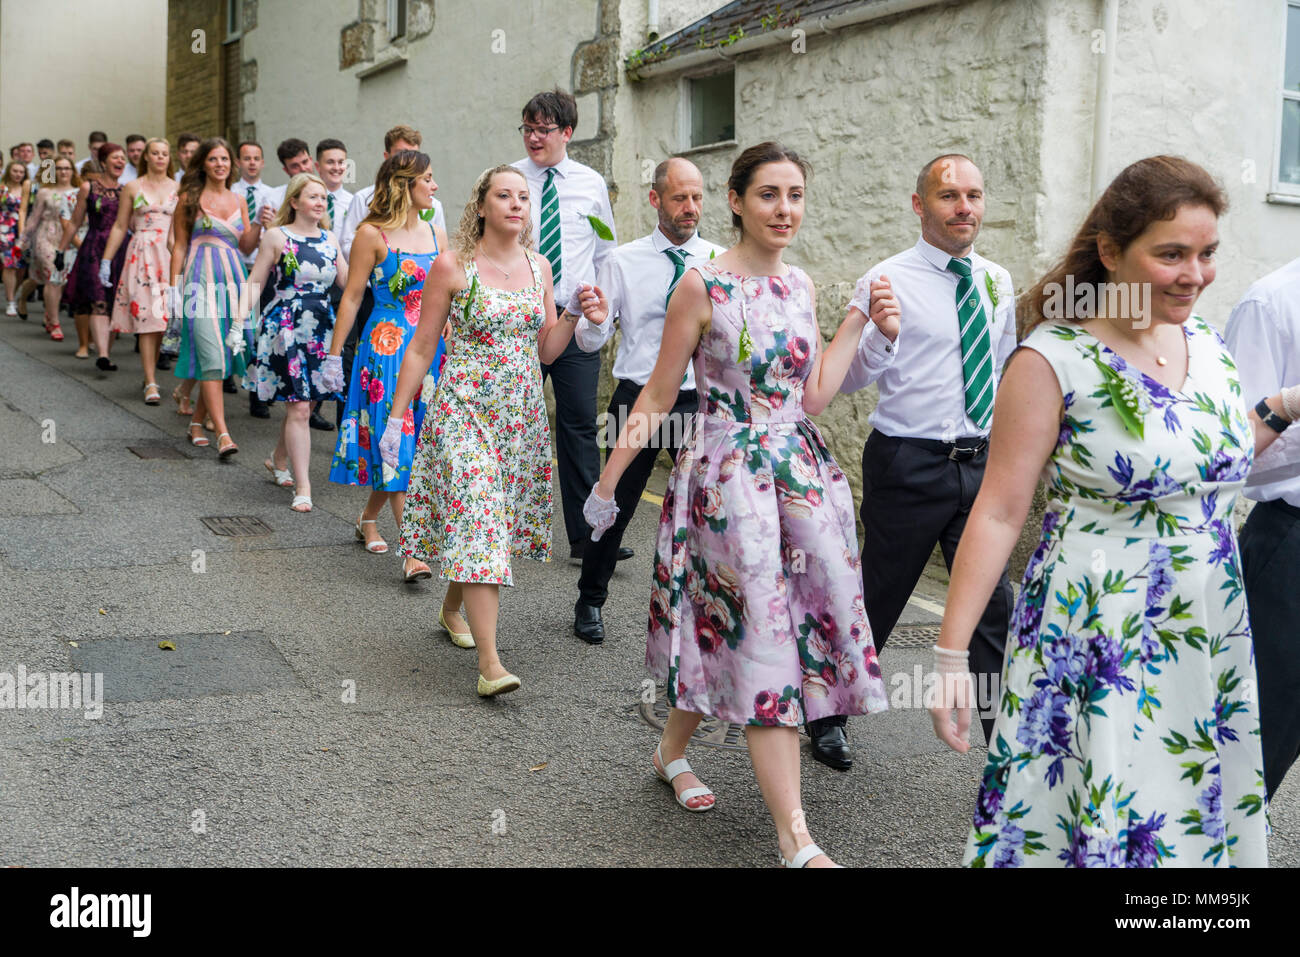 Editorial: Unknown members of the public, potential logo and other trademarks. Helston, Cornwall, UK, 08/05/2018. Dancers make their way through the s Stock Photo